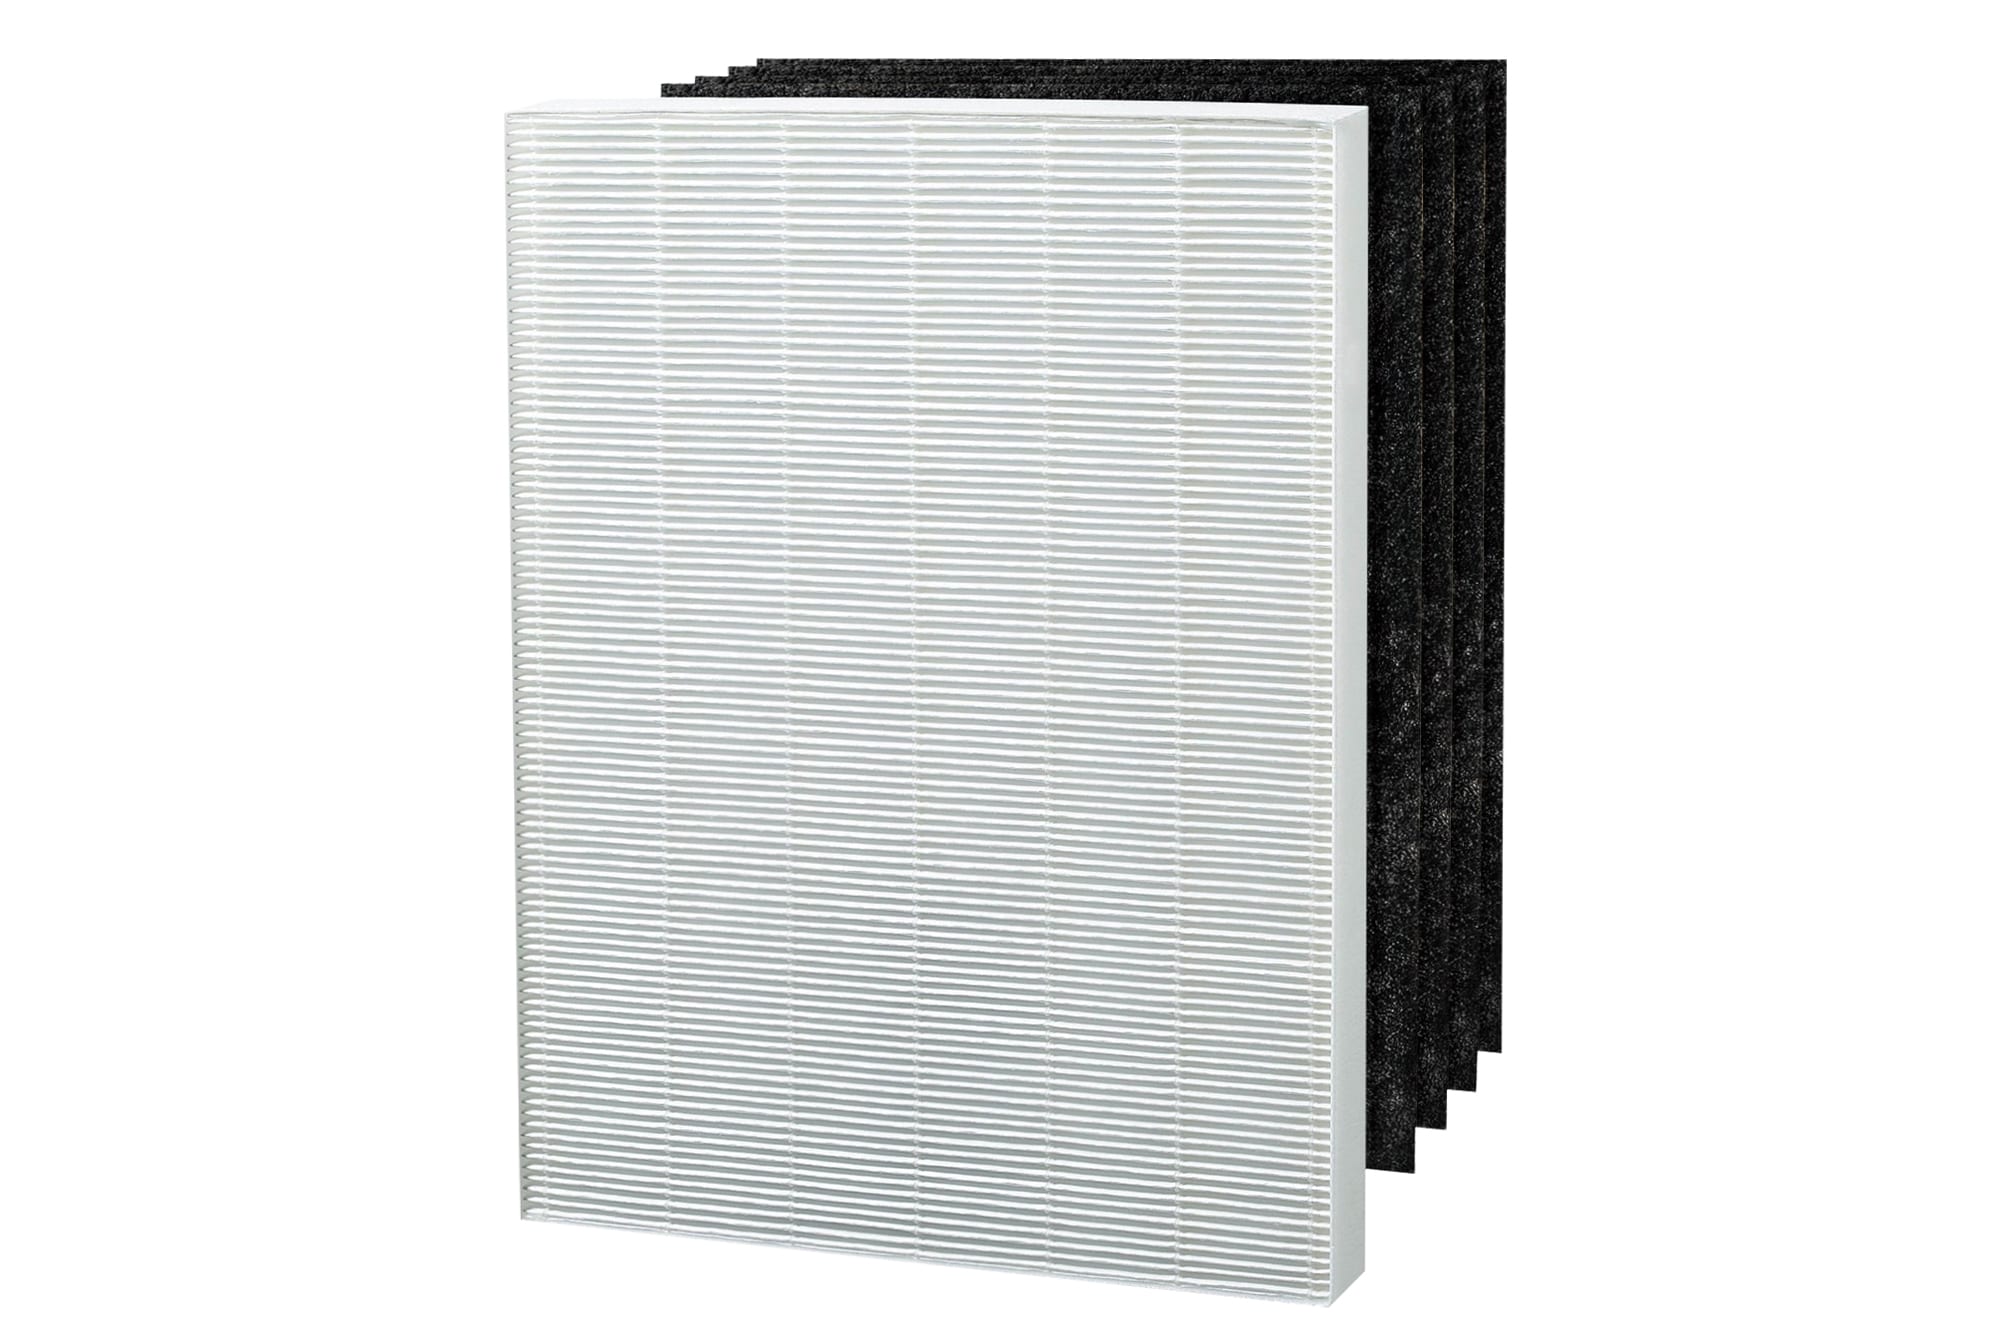 LifeSupplyUSA Replacement HEPA Filter set for Winix Size 25 113250 113200 P450 